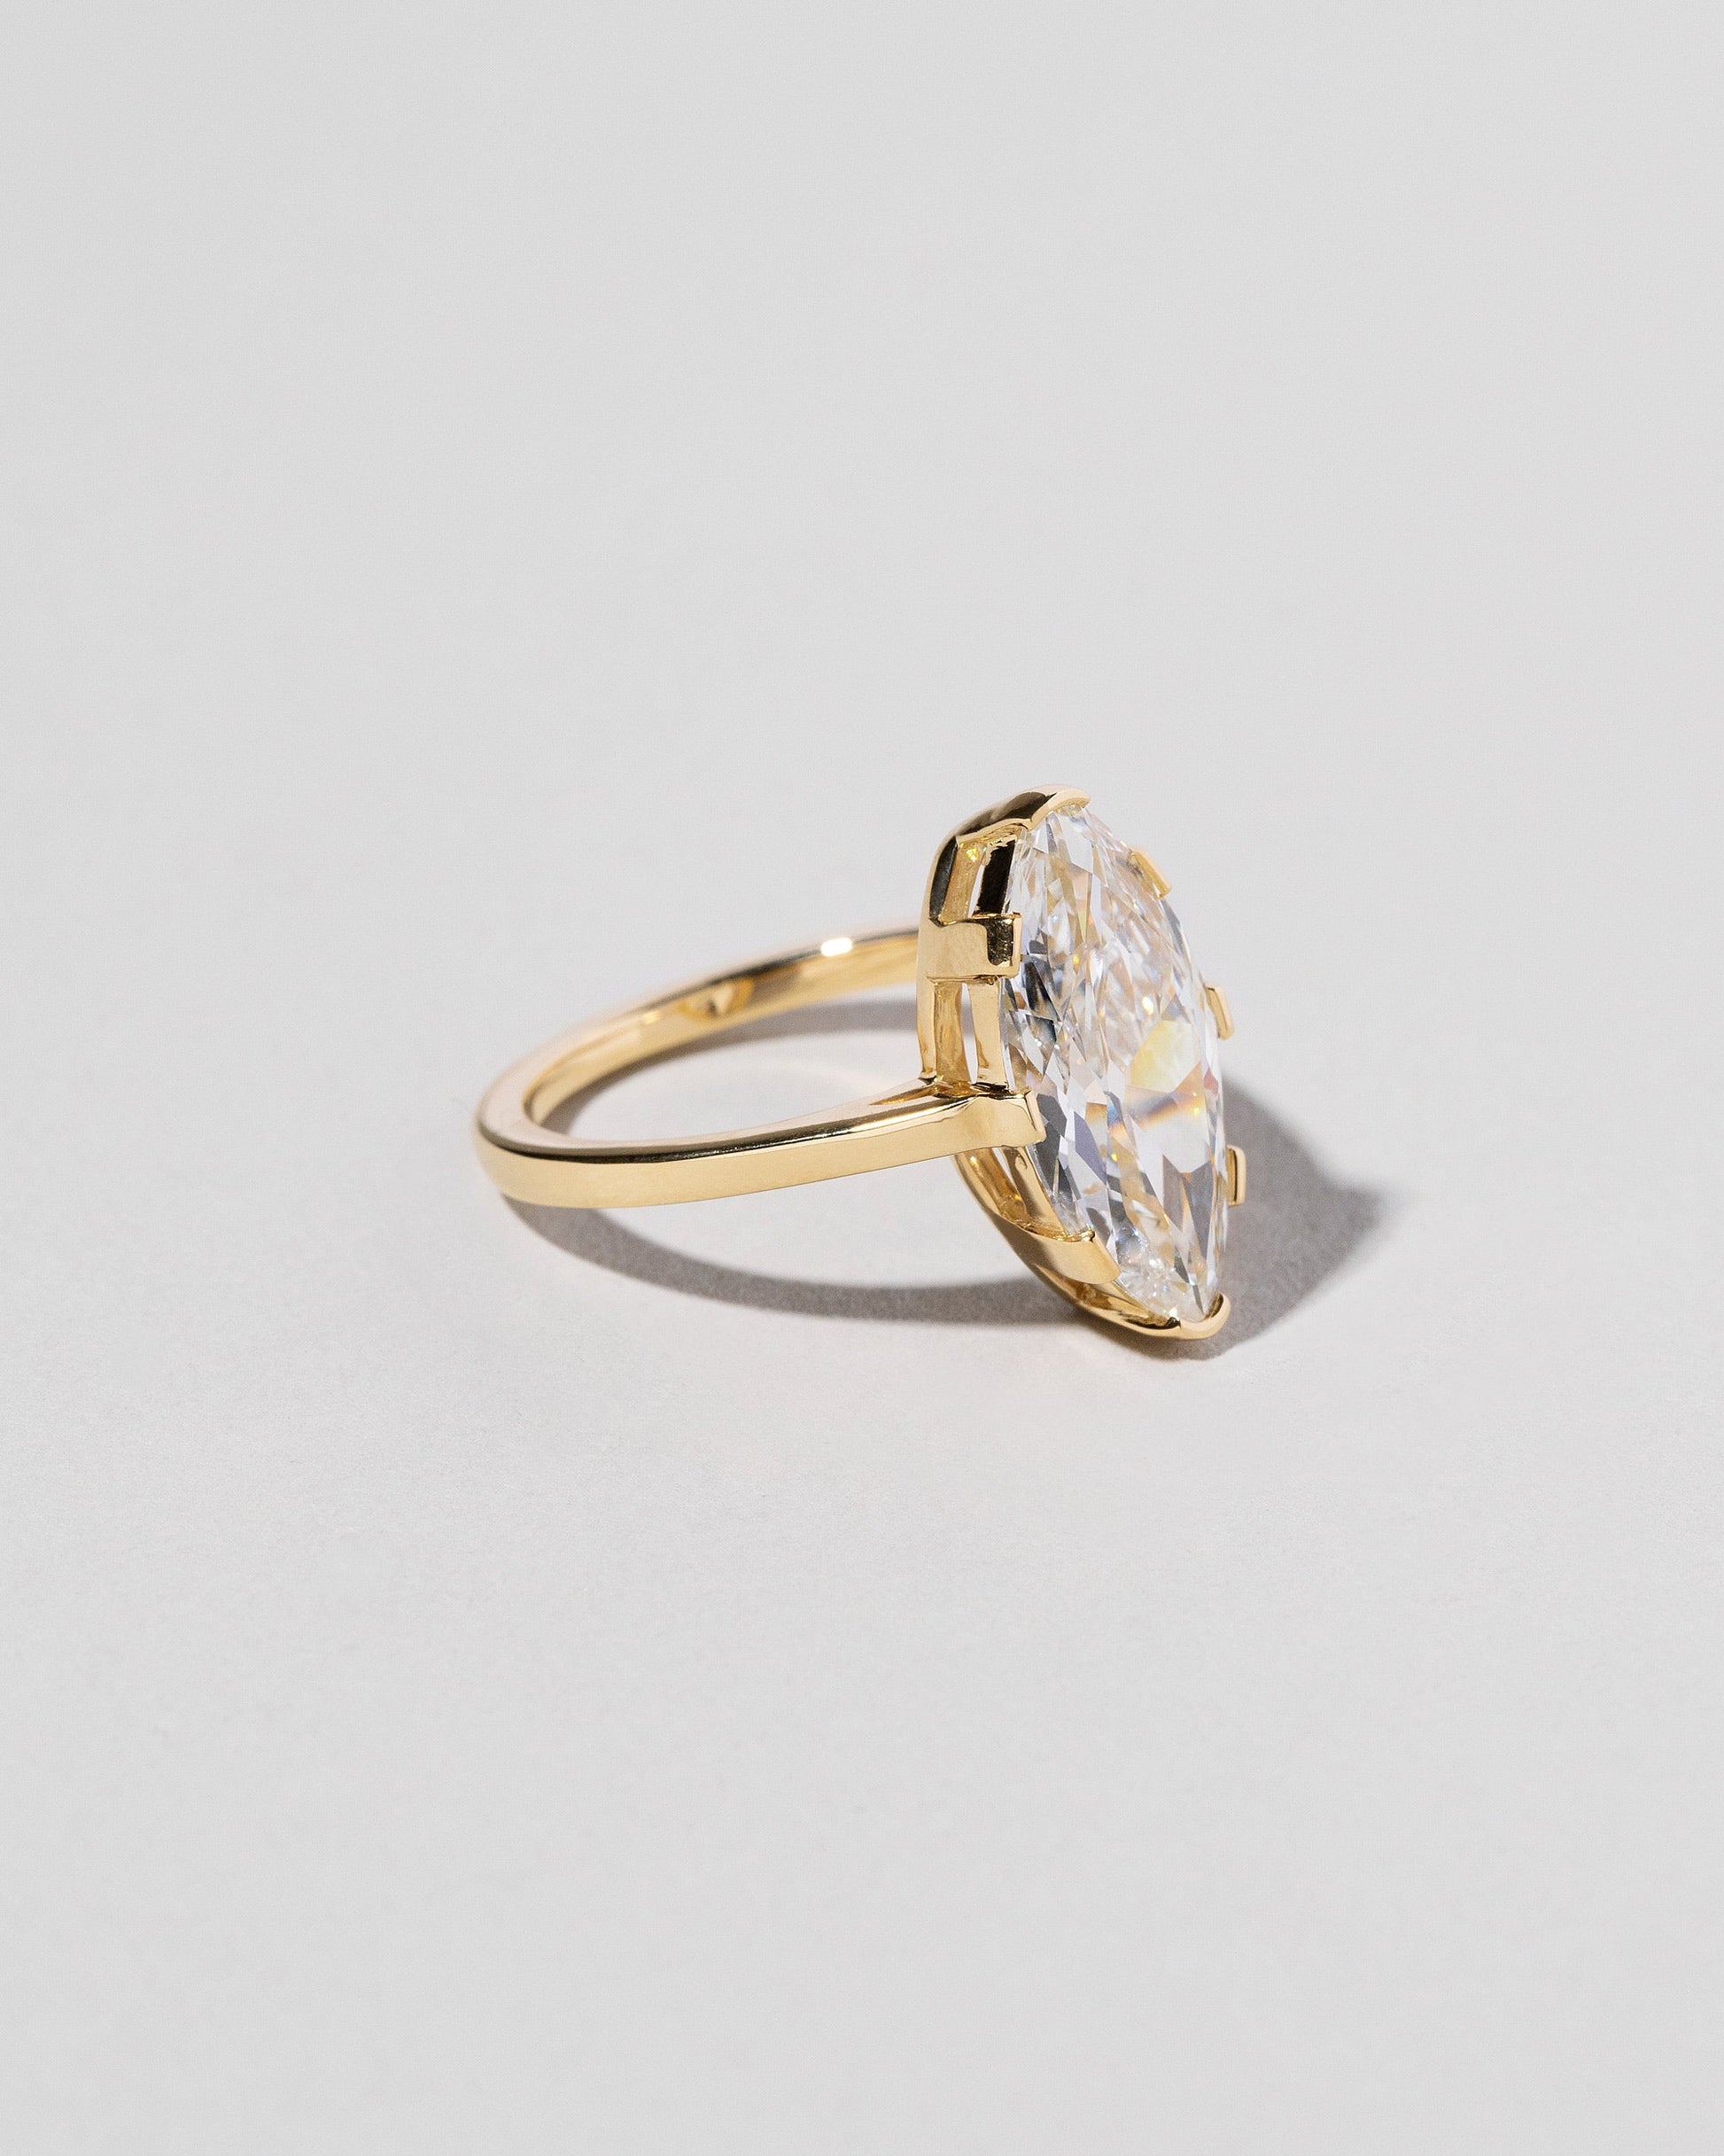  North-South Navette Diamond Solitaire Ring on light color background.